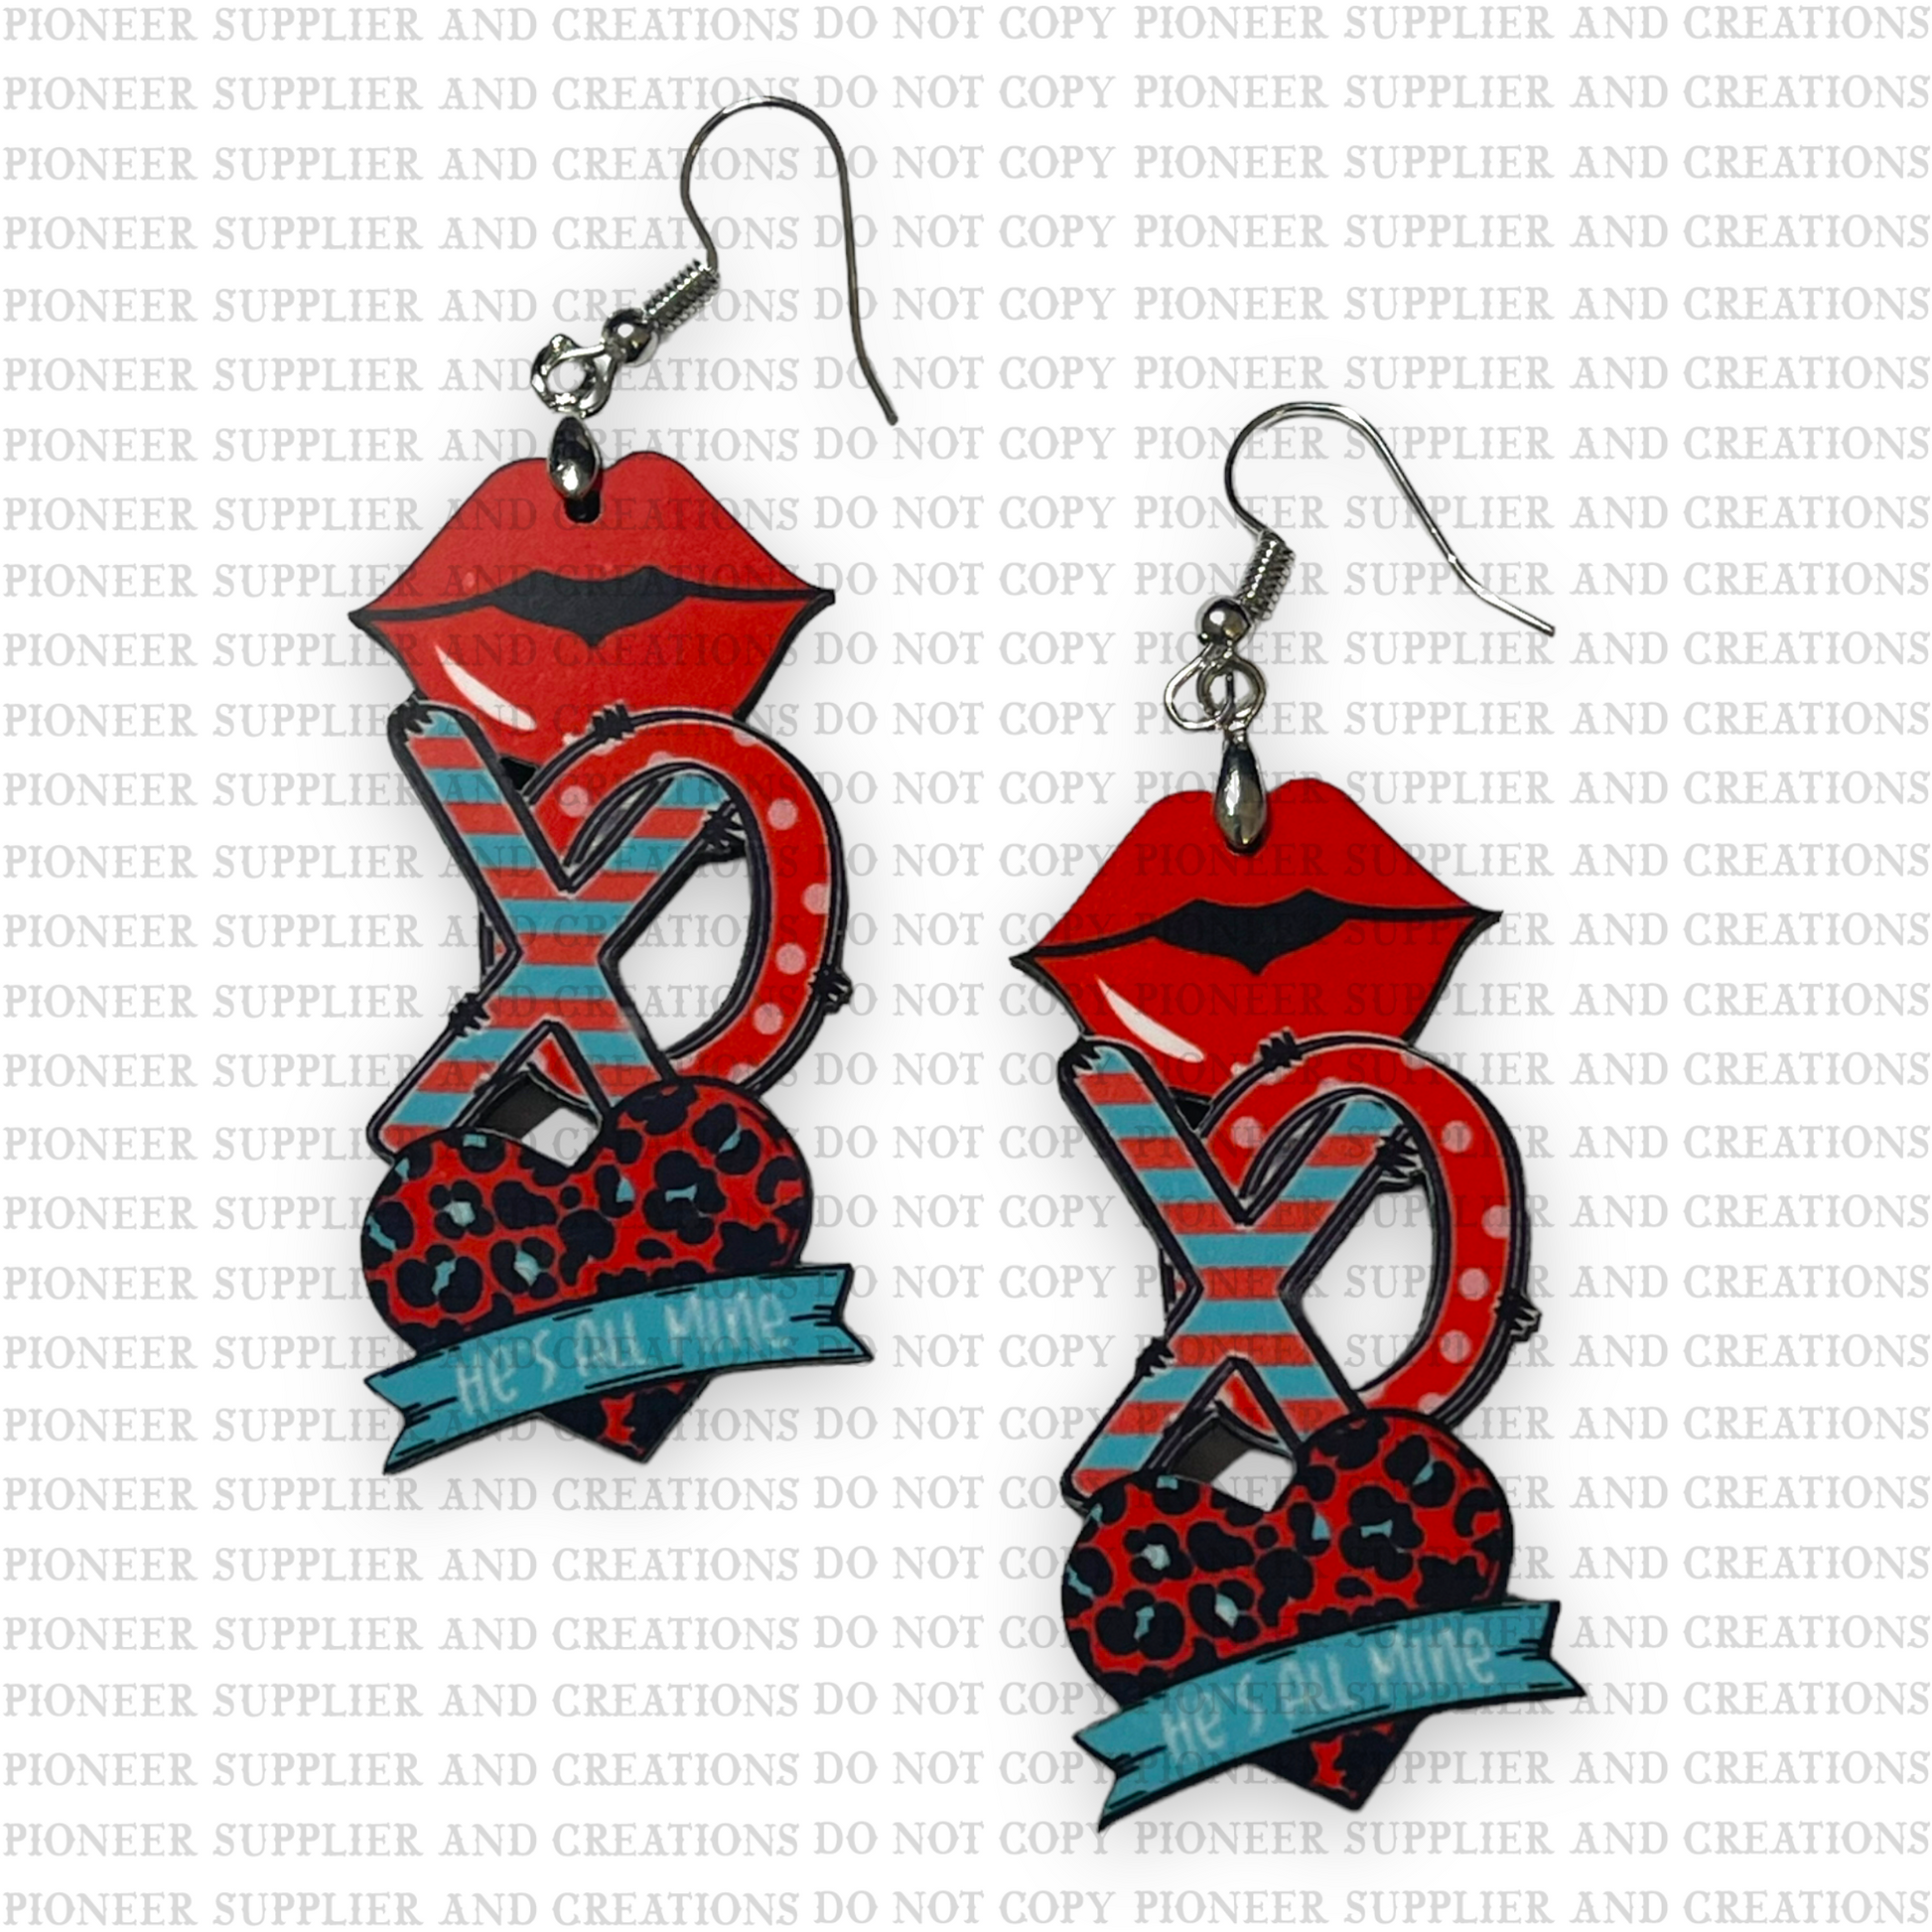 50 Pcs Earring Blanks MDF Sublimation Printing Earrings for